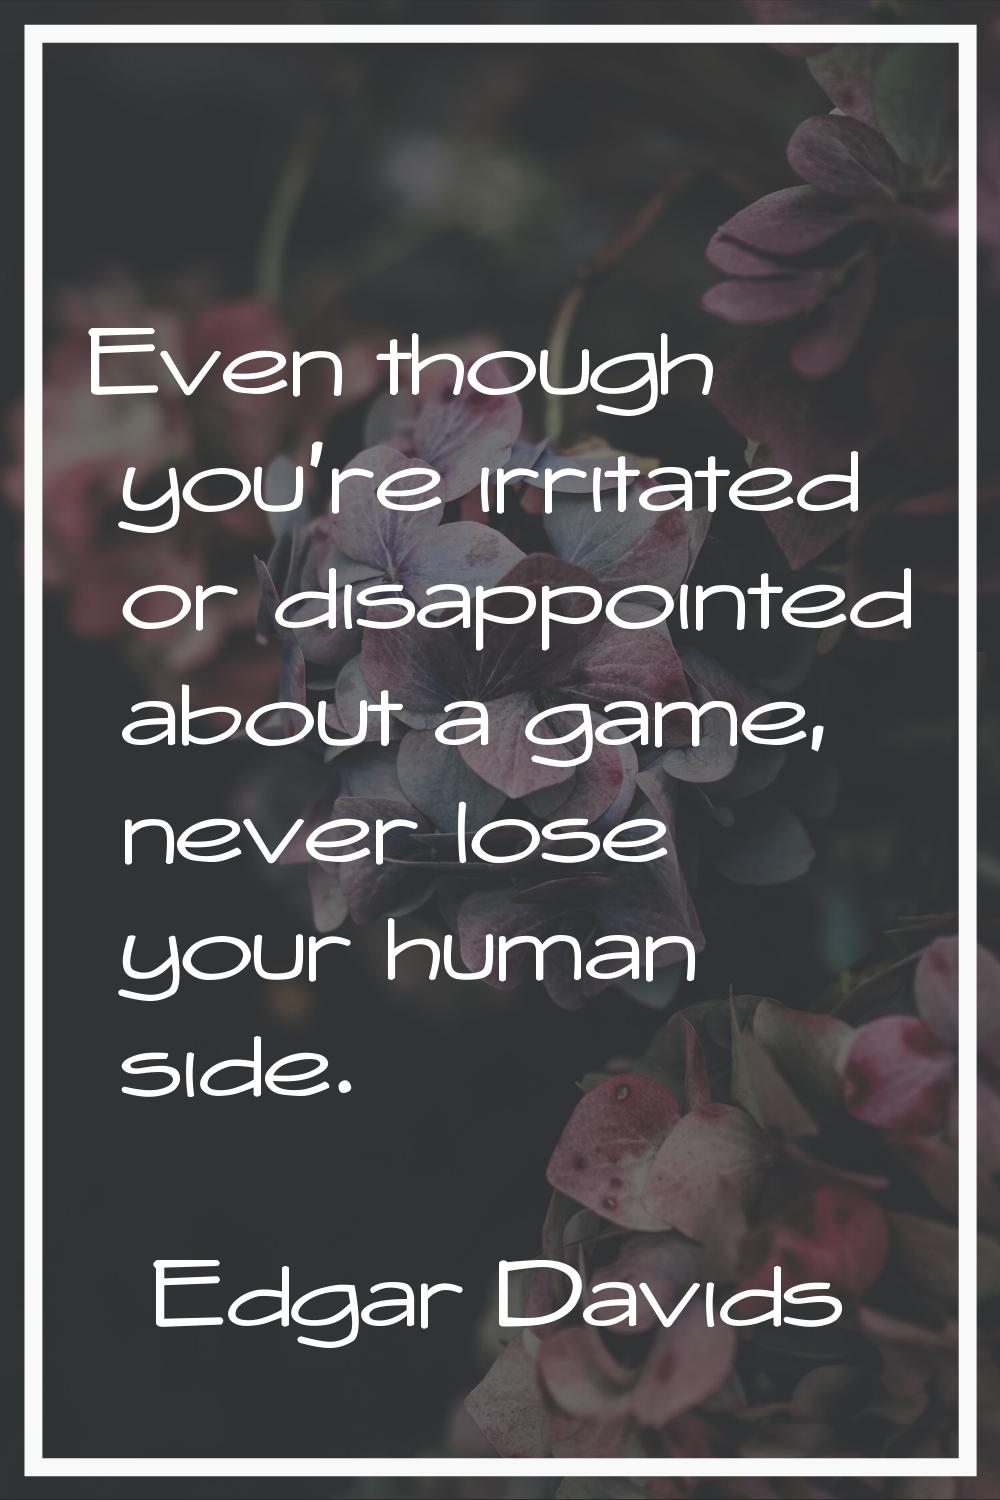 Even though you're irritated or disappointed about a game, never lose your human side.